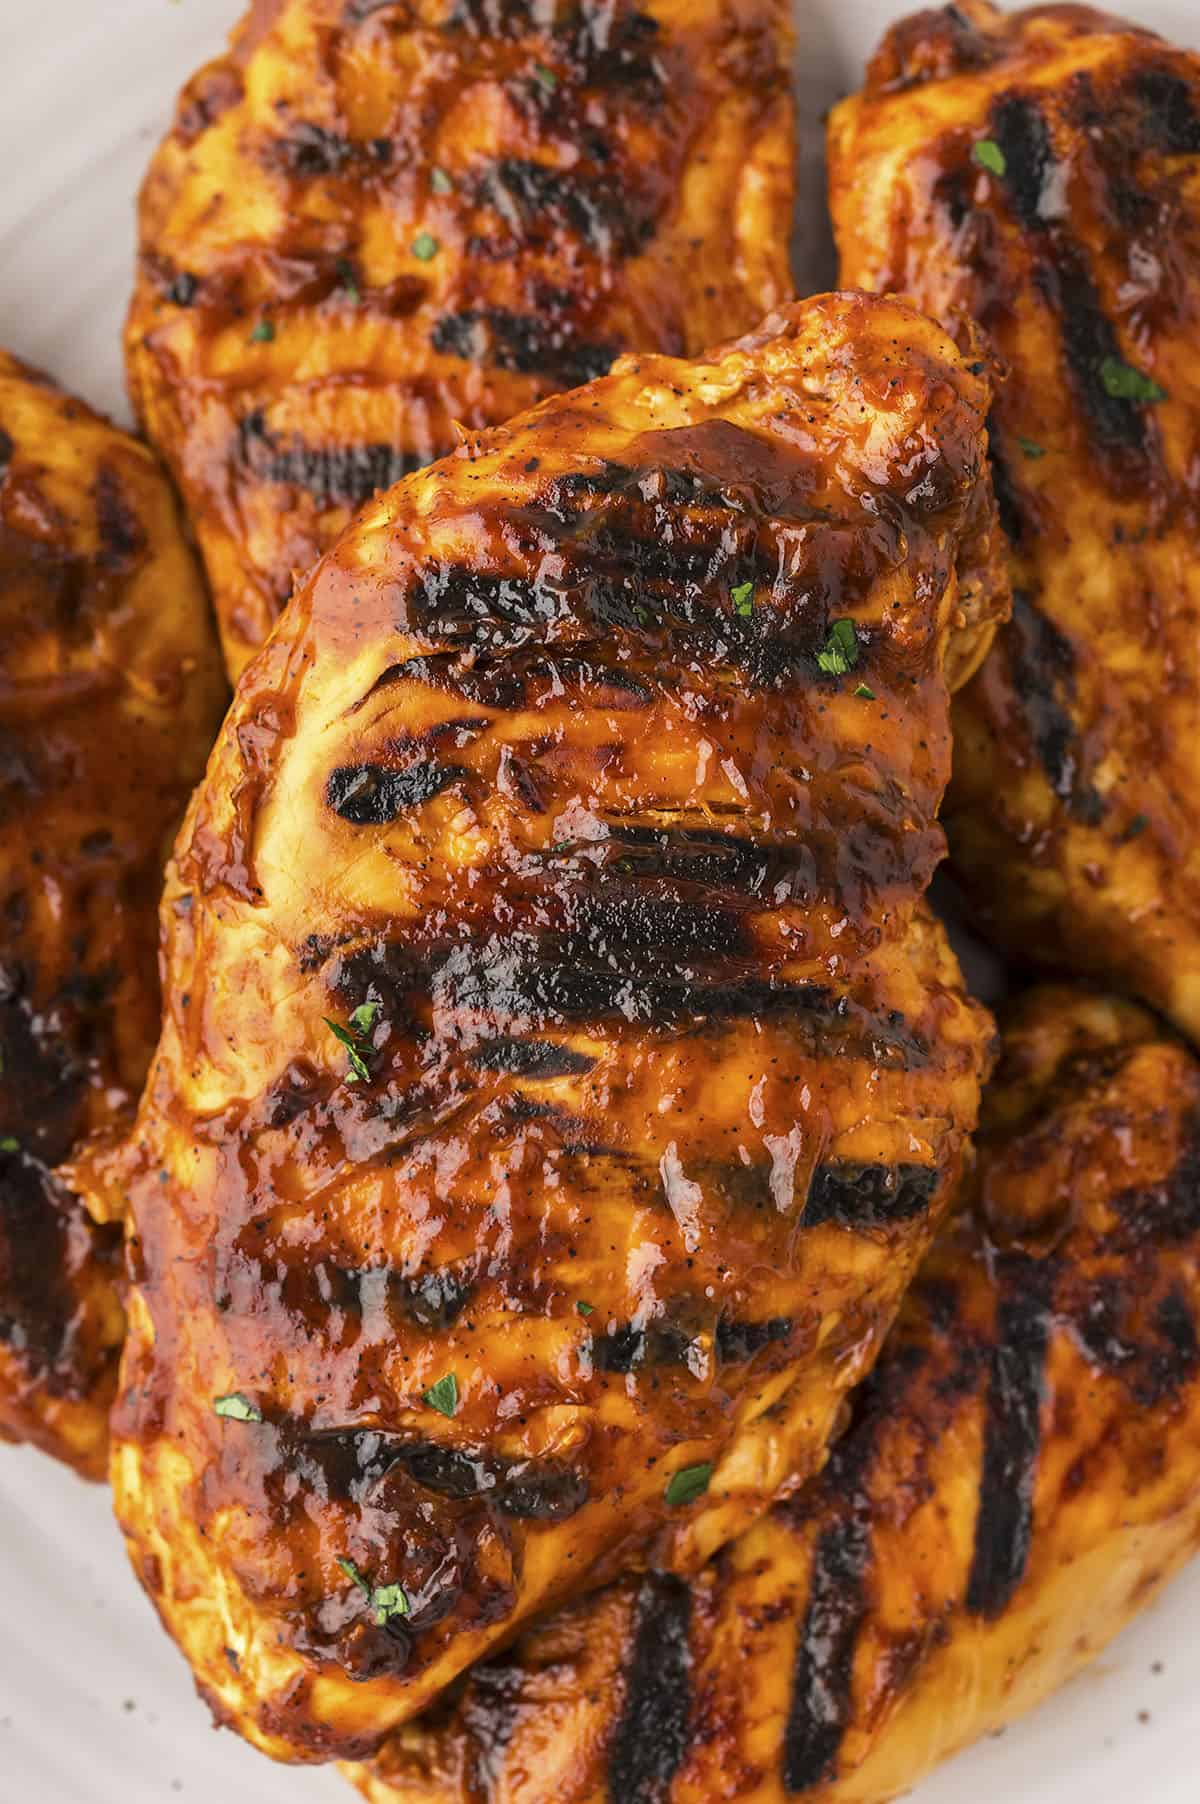 Grilled barbecue chicken recipe piled together on plate.